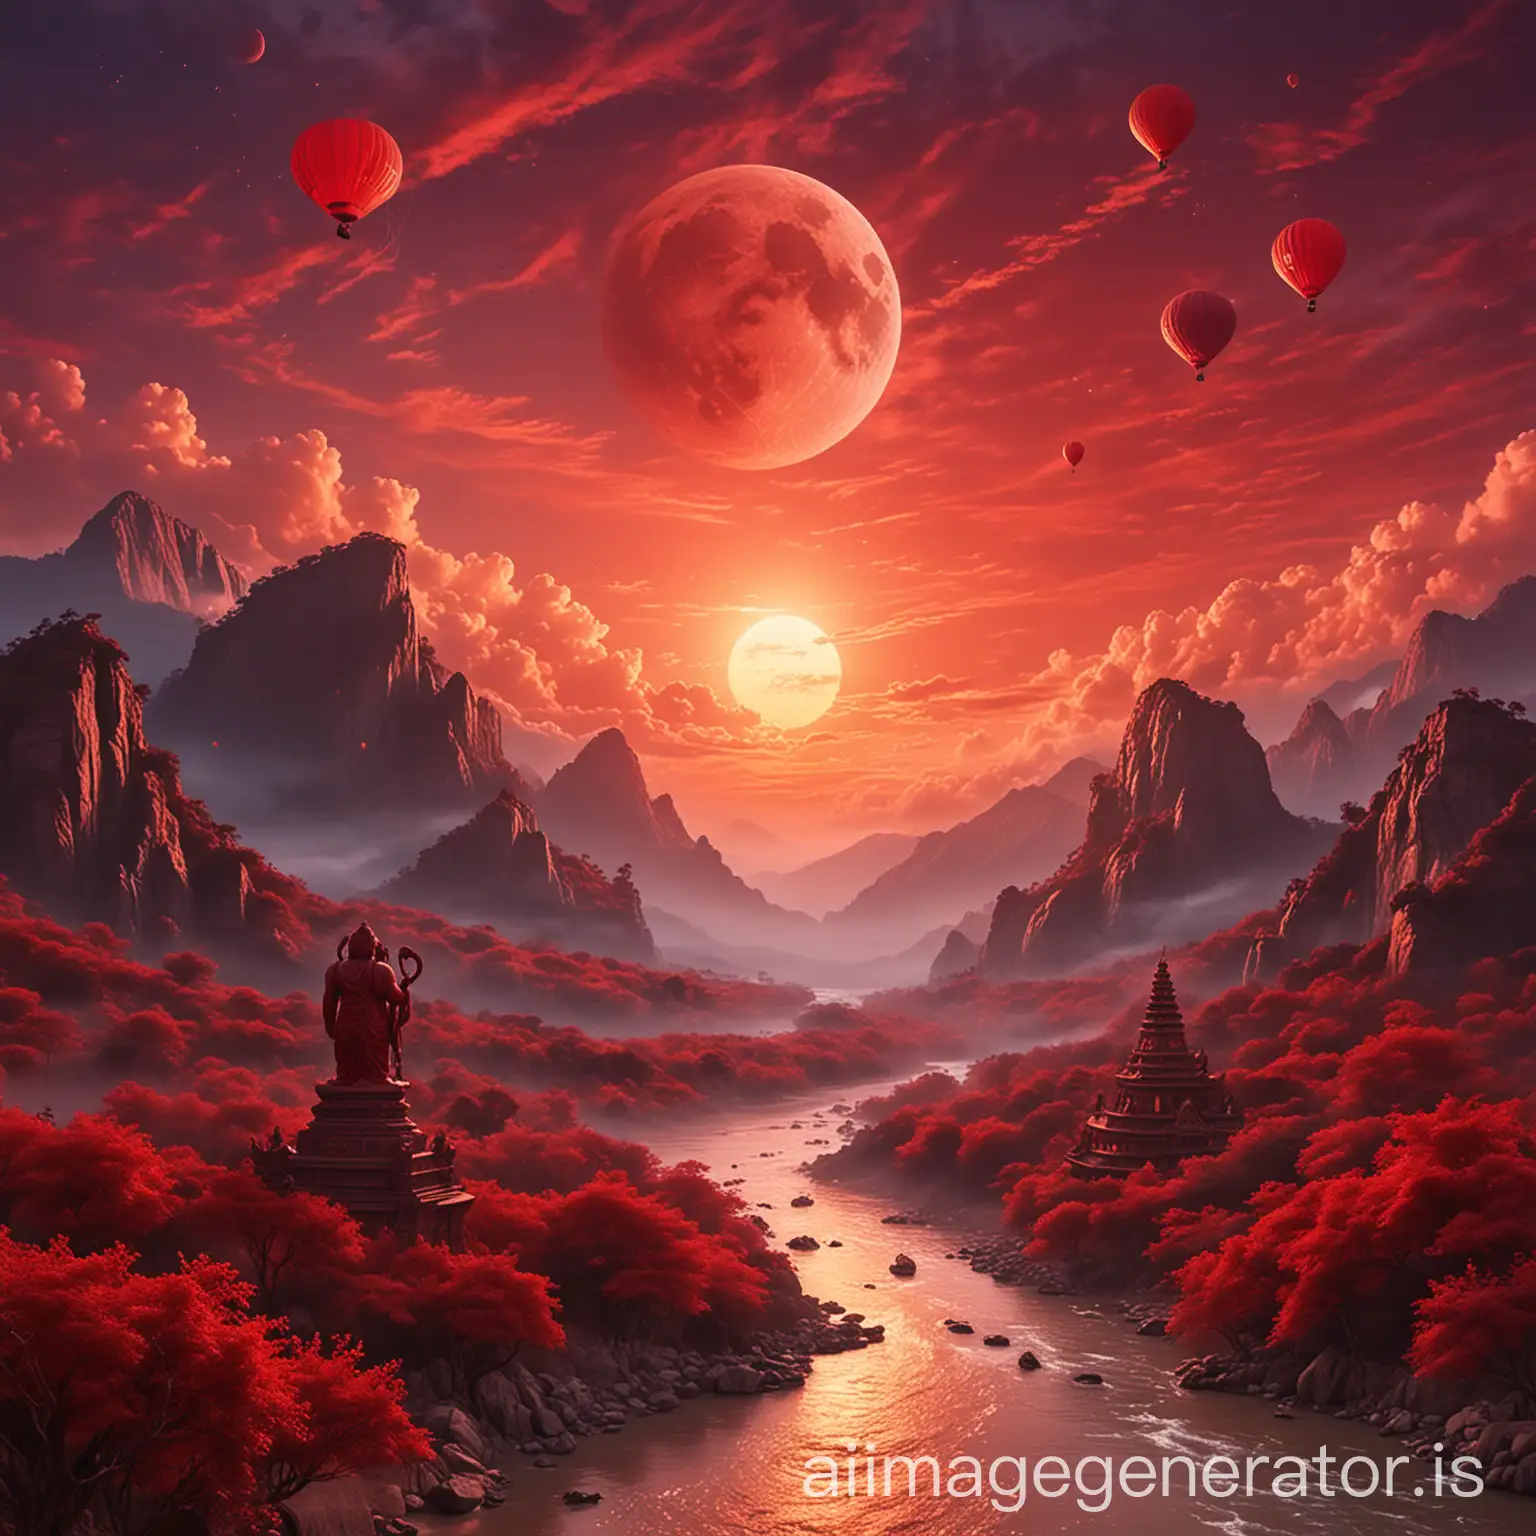 Red cloudy sky with red moon and red mountains with hot balloons on sky, red jungle with Bajrangbali statue with flowing river